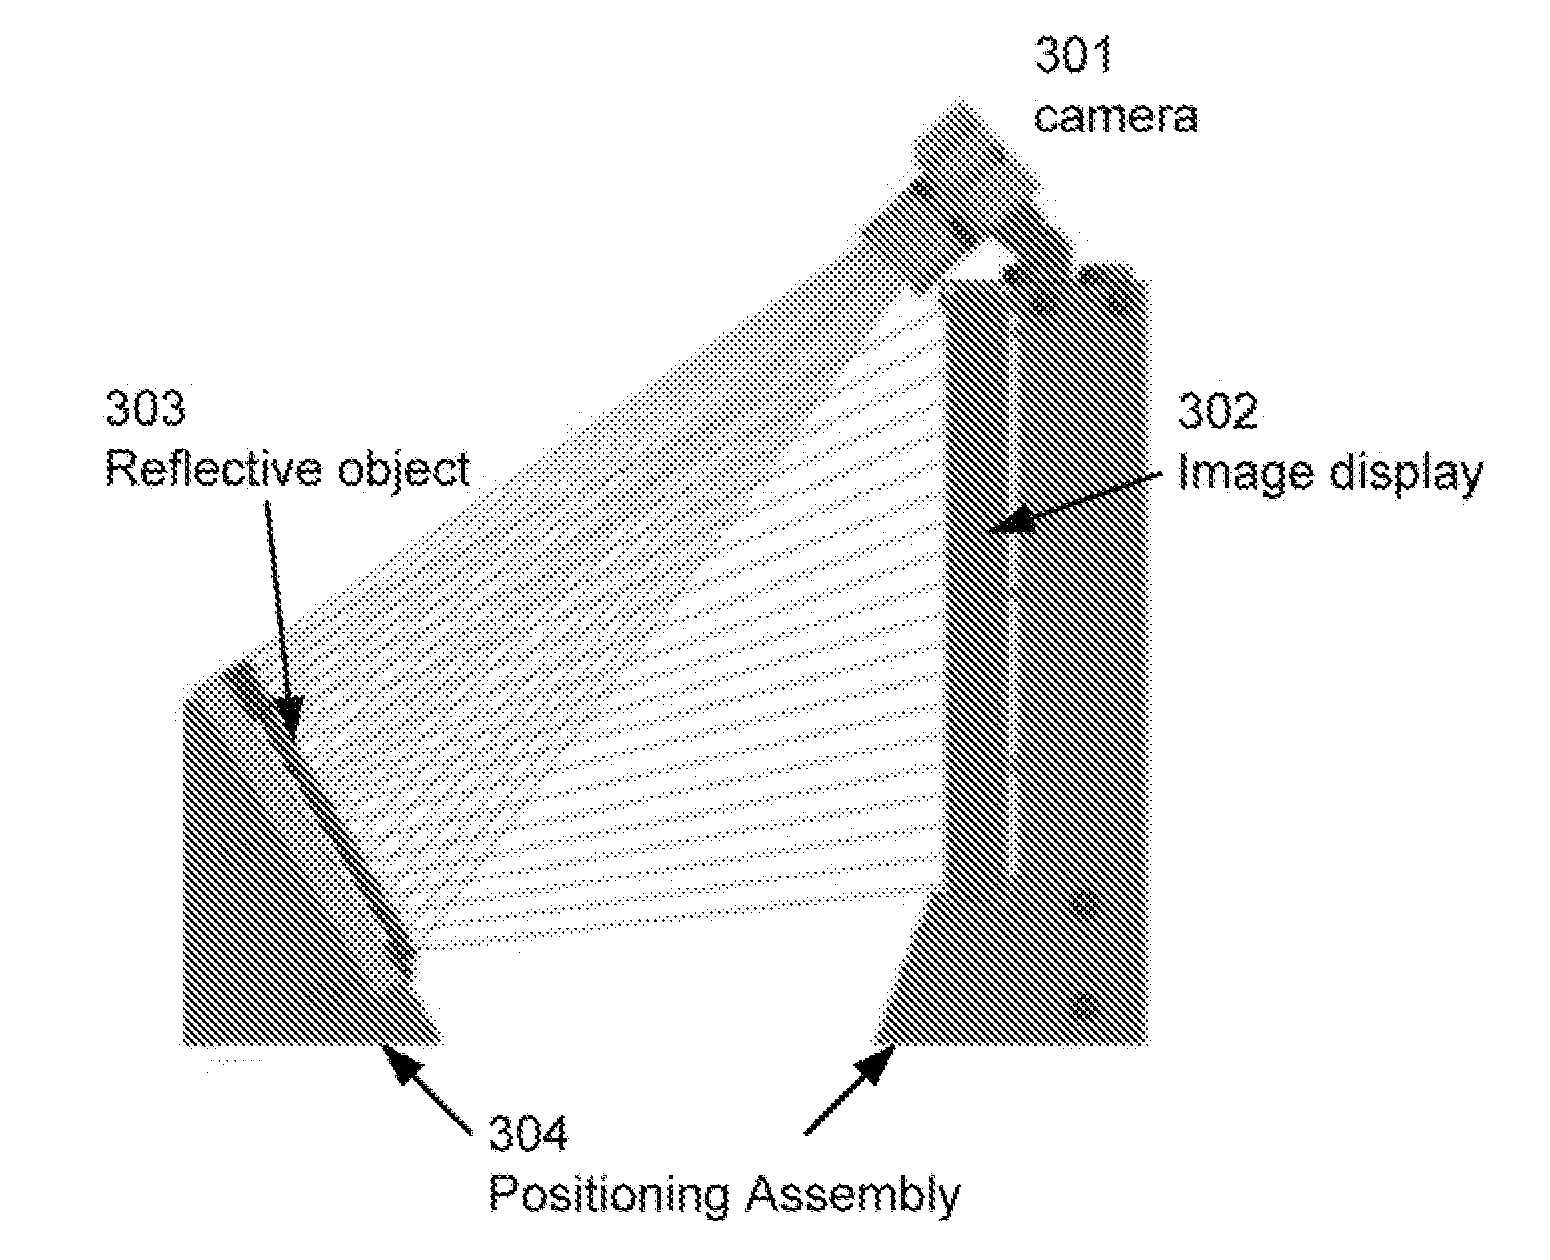 Method and apparatus for surface contour mapping